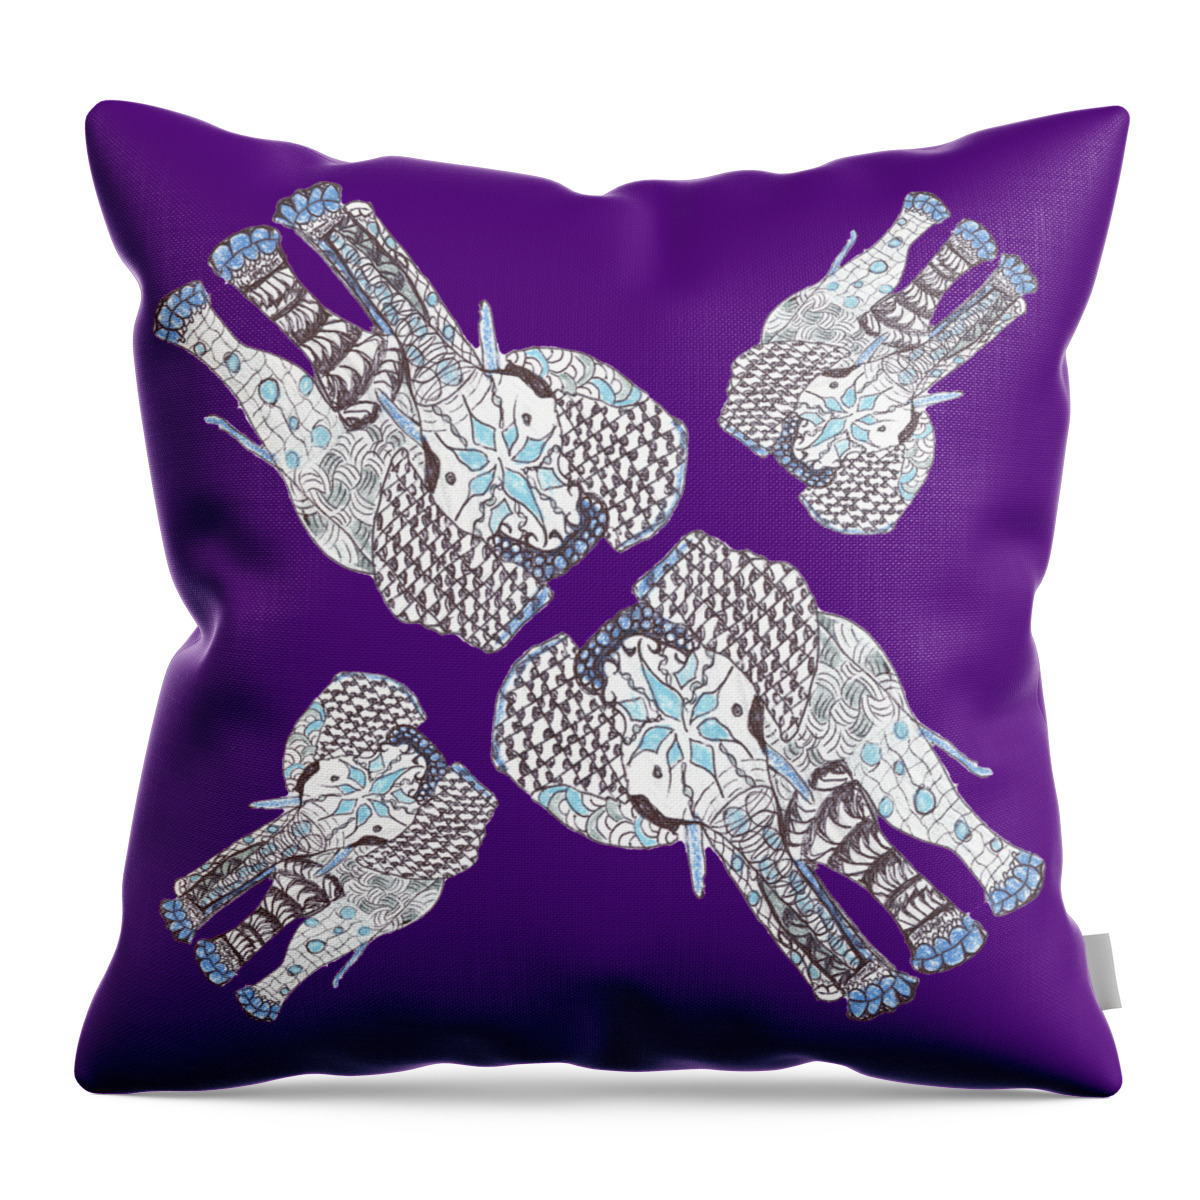 Elephant Babies Throw Pillow featuring the photograph Elephant Babies by Jean Noren